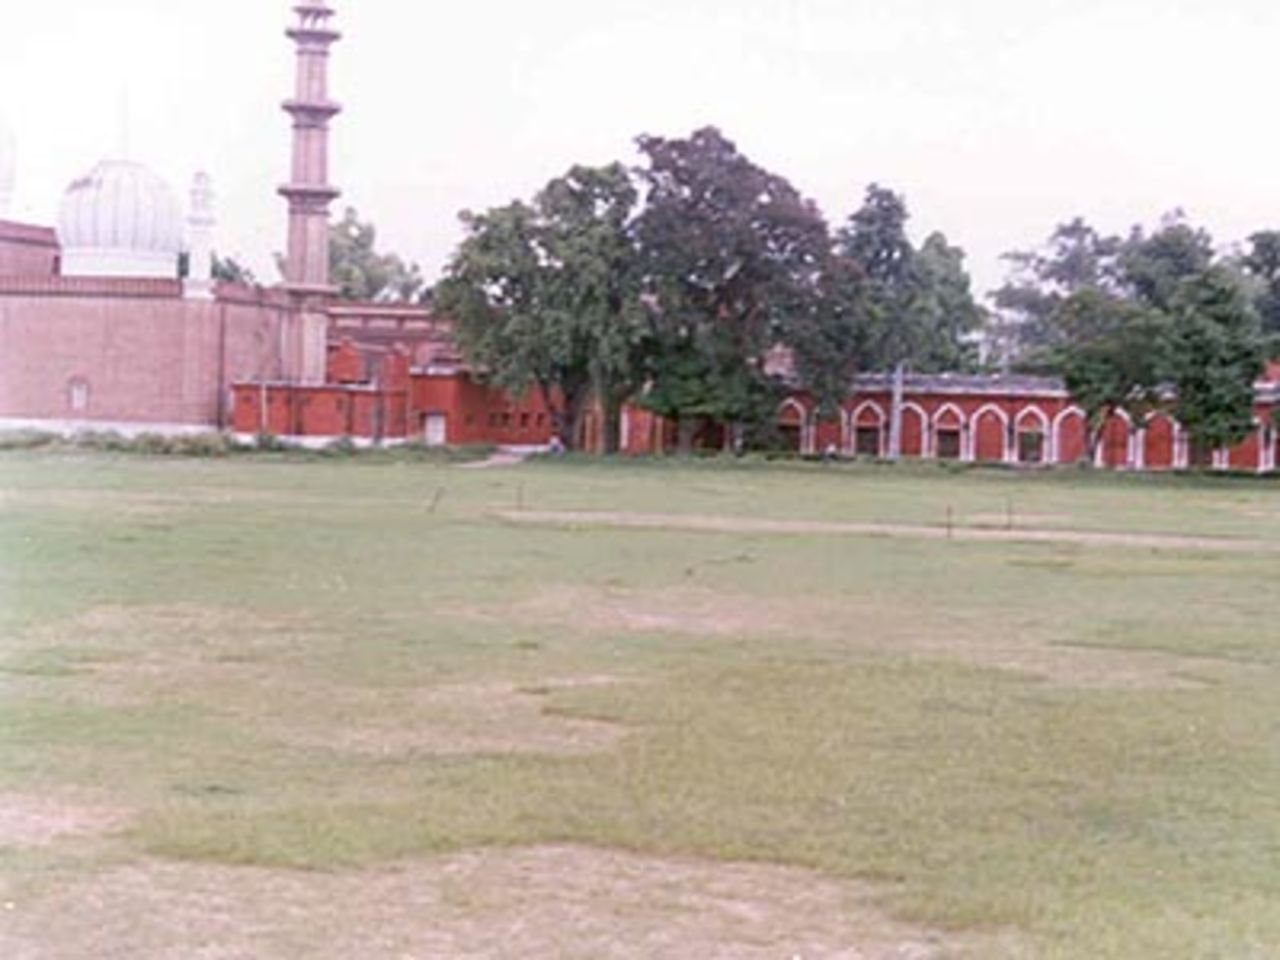 The Aligarh Muslim University Ground with the colonial buildings as the backdrop